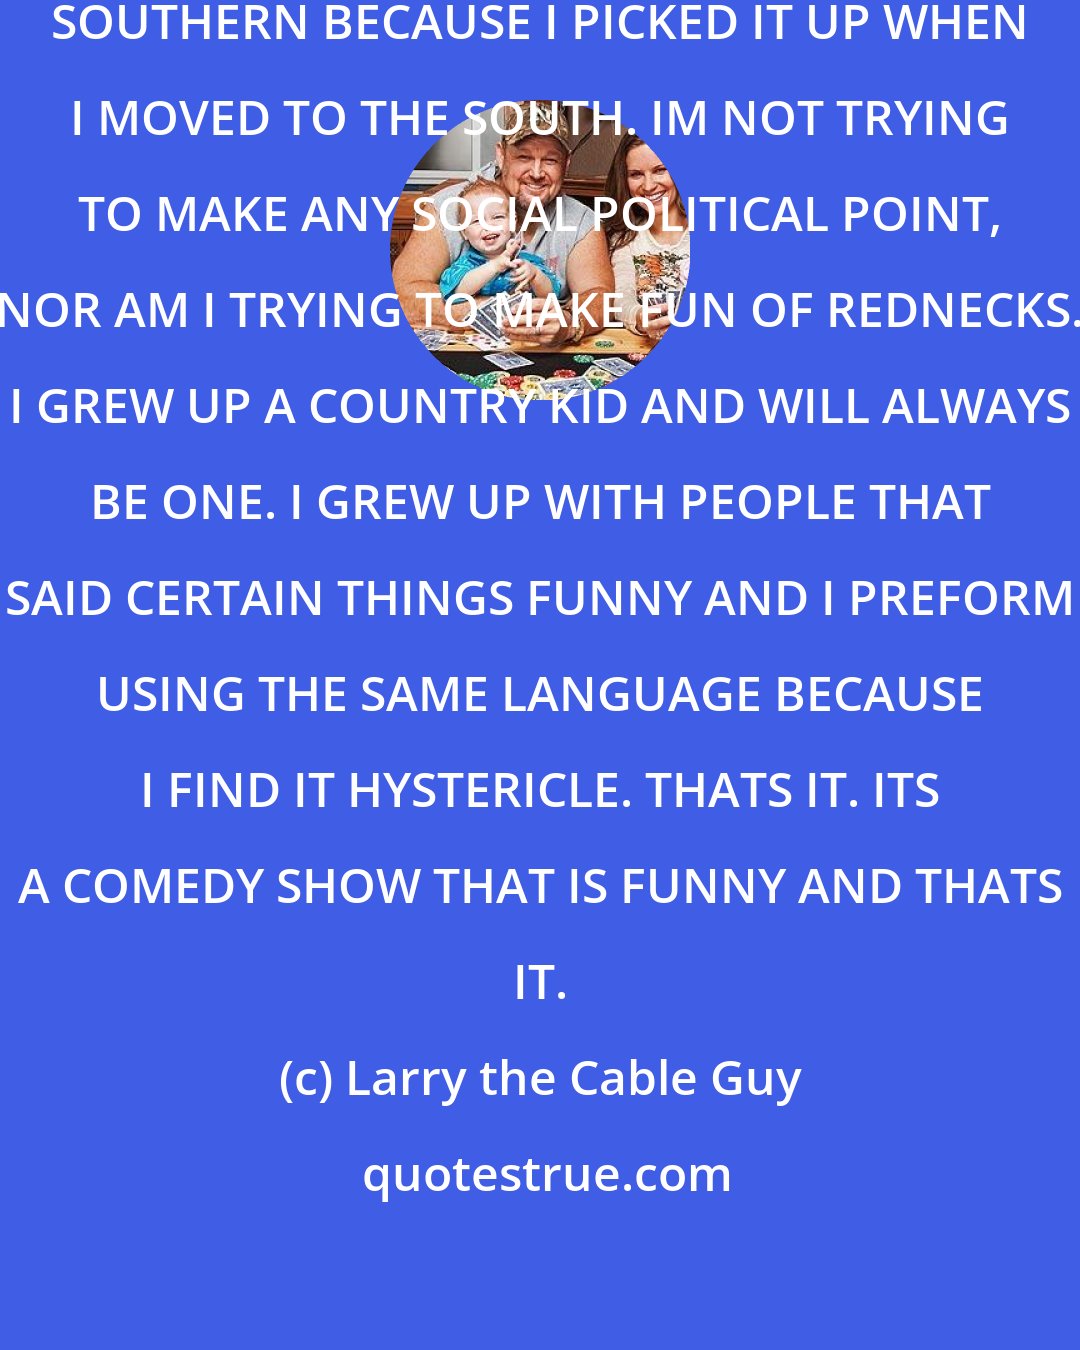 Larry the Cable Guy: MY ACT IS 'NOTHING BUT COMEDY. I TALK SOUTHERN BECAUSE I PICKED IT UP WHEN I MOVED TO THE SOUTH. IM NOT TRYING TO MAKE ANY SOCIAL POLITICAL POINT, NOR AM I TRYING TO MAKE FUN OF REDNECKS. I GREW UP A COUNTRY KID AND WILL ALWAYS BE ONE. I GREW UP WITH PEOPLE THAT SAID CERTAIN THINGS FUNNY AND I PREFORM USING THE SAME LANGUAGE BECAUSE I FIND IT HYSTERICLE. THATS IT. ITS A COMEDY SHOW THAT IS FUNNY AND THATS IT.